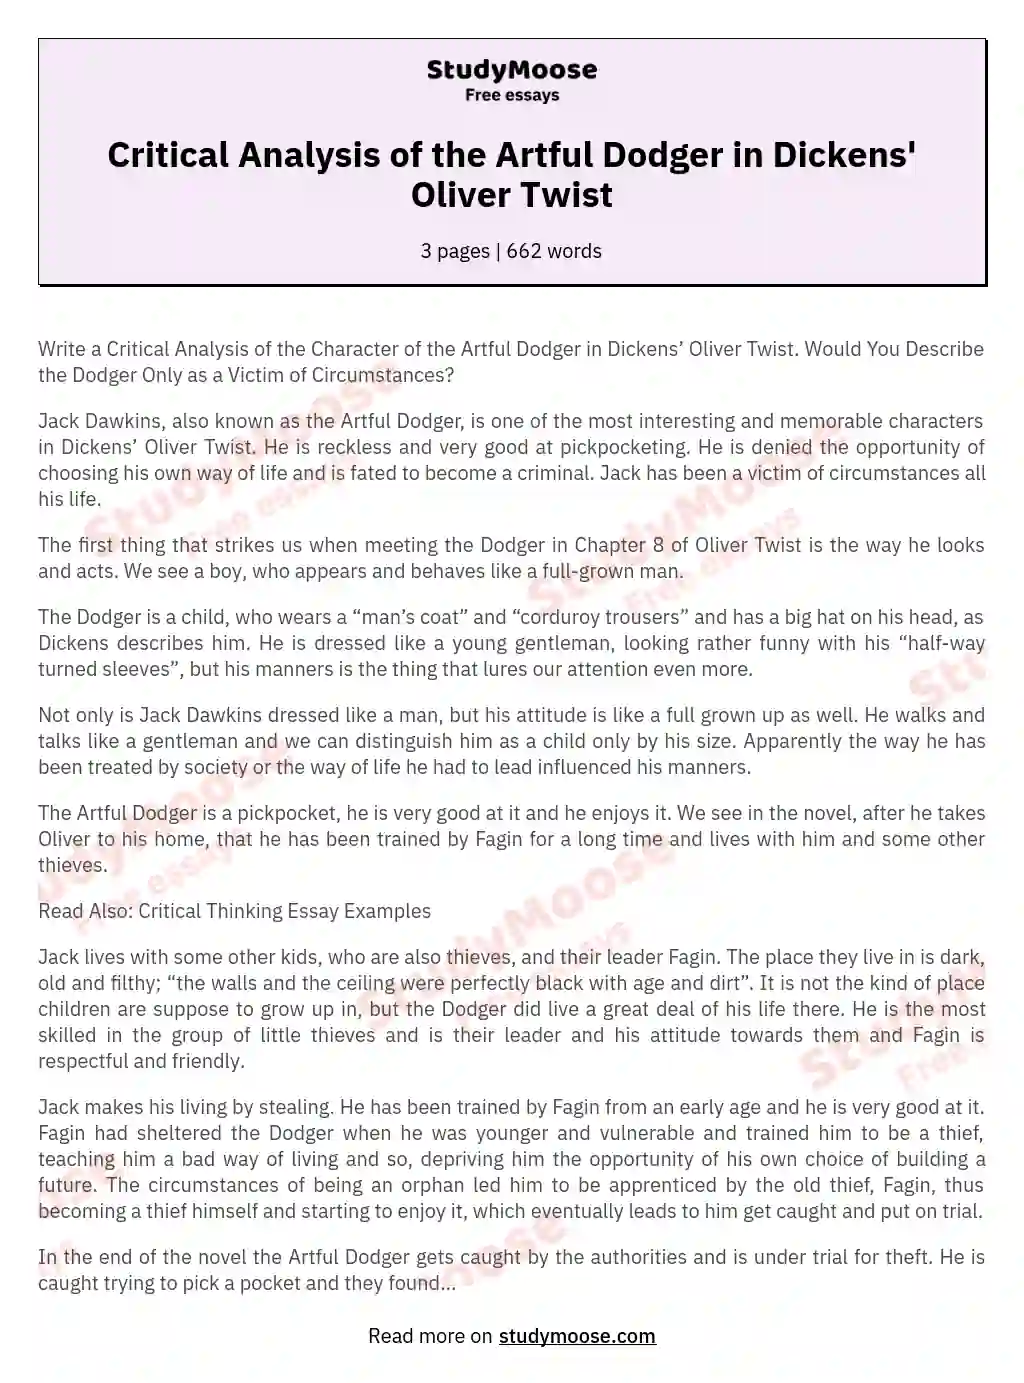 Critical Analysis of the Artful Dodger in Dickens' Oliver Twist essay